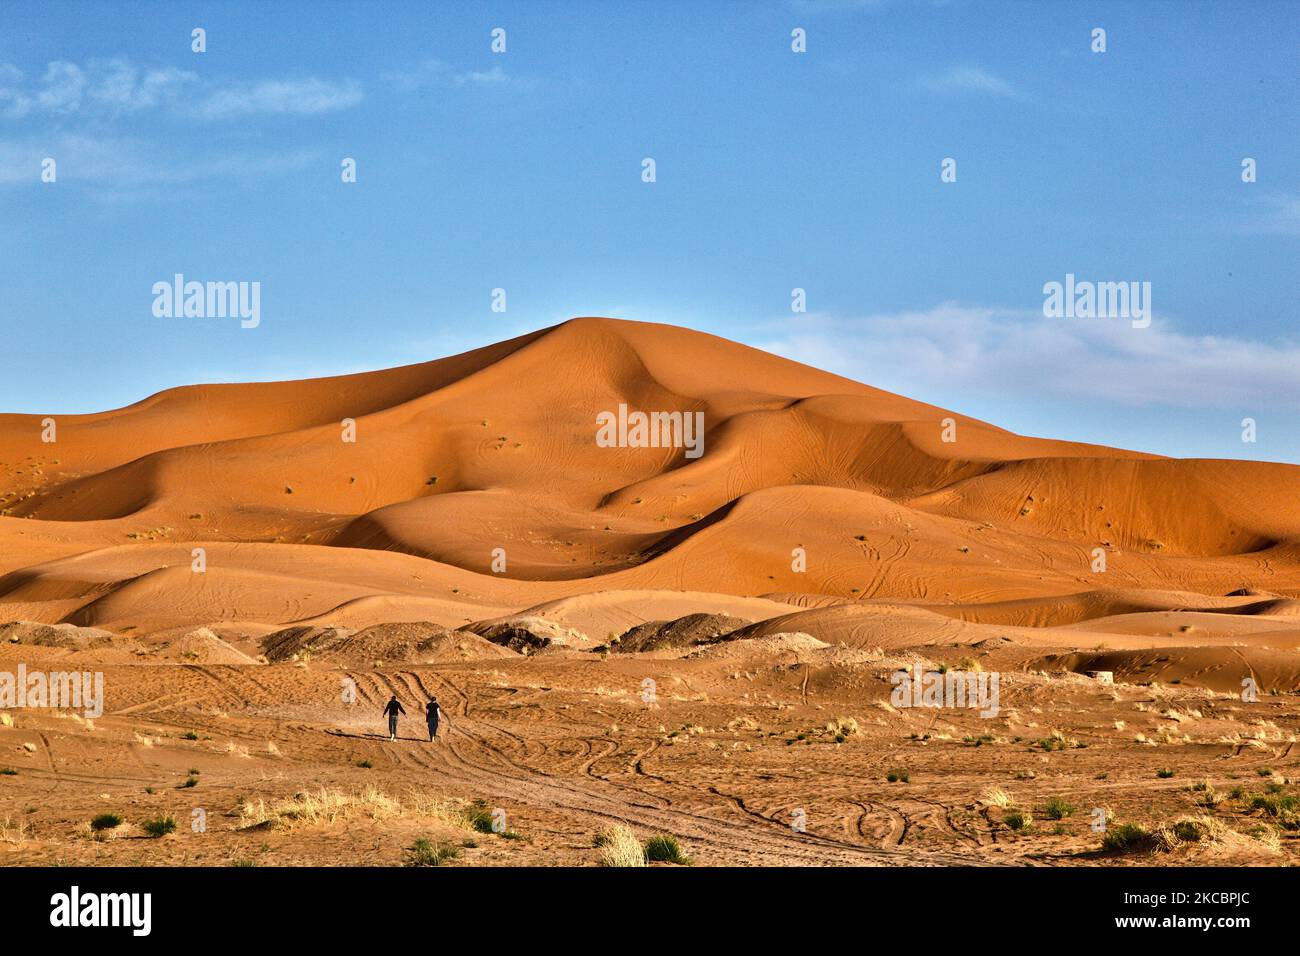 Tourists walk towards the sand dunes in the Erg Chebbi desert near the small village of Merzouga in Morocco, Africa. Merzouga is a village in the Sahara Desert in Morocco, on the edge of Erg Chebbi, a 50km long and 5km wide set of sand dunes that reach up to 350m. (Photo by Creative Touch Imaging Ltd./NurPhoto) Stock Photo